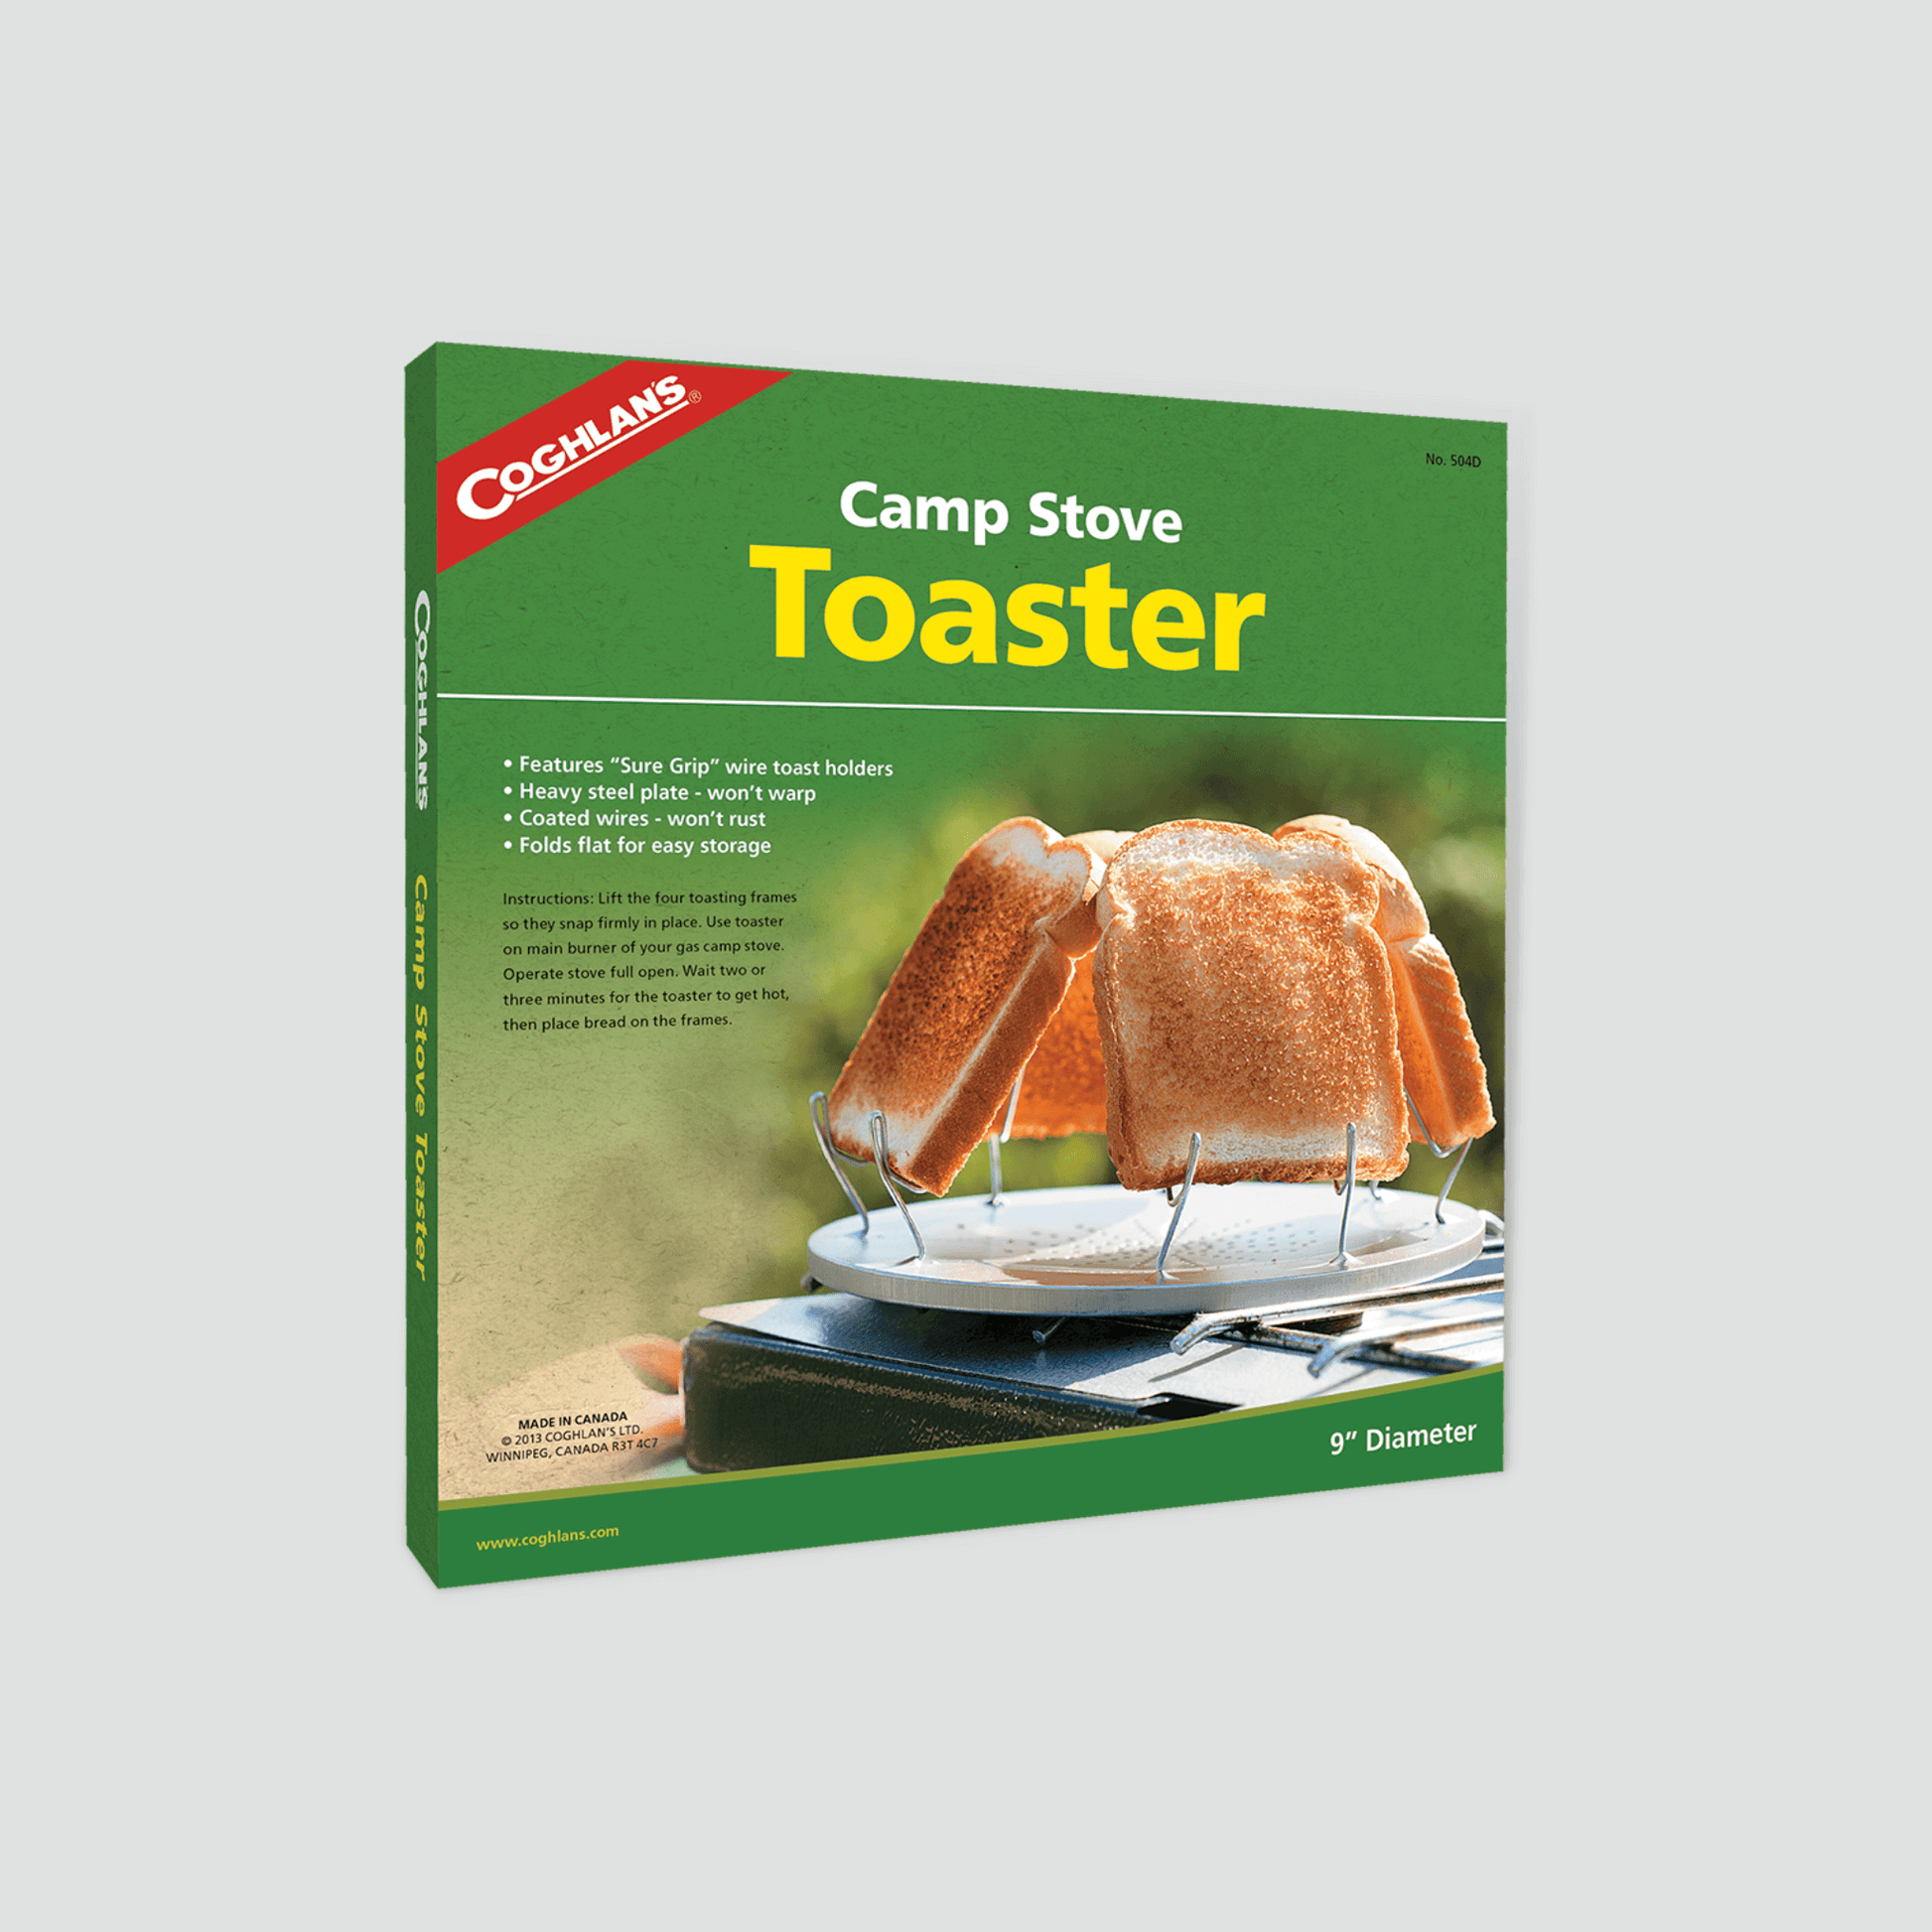 4-slot Camp Stove Toaster in the package